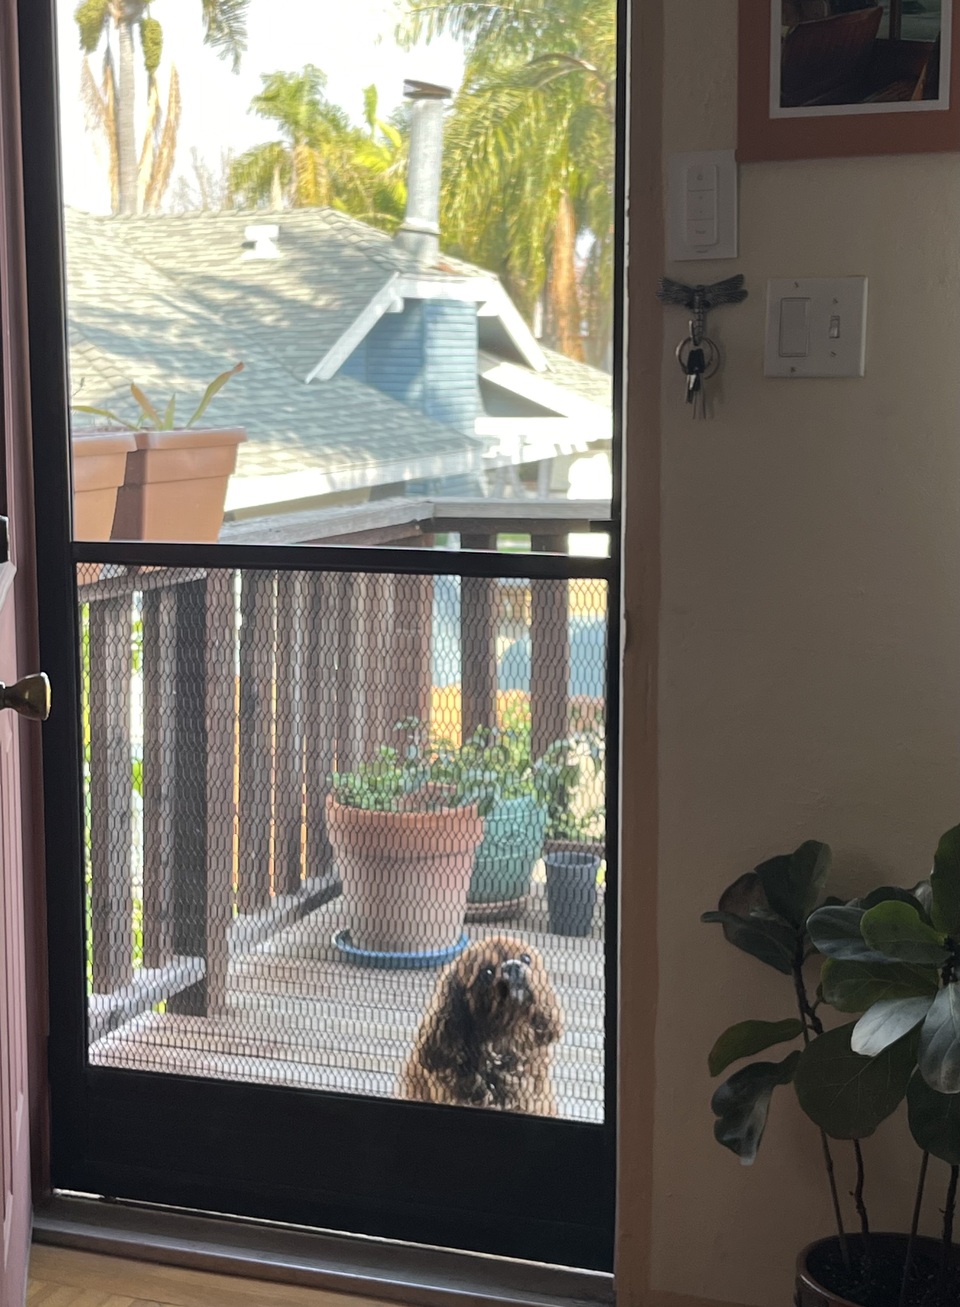 “Pweaseee can I come in? 🥺” - Rusty